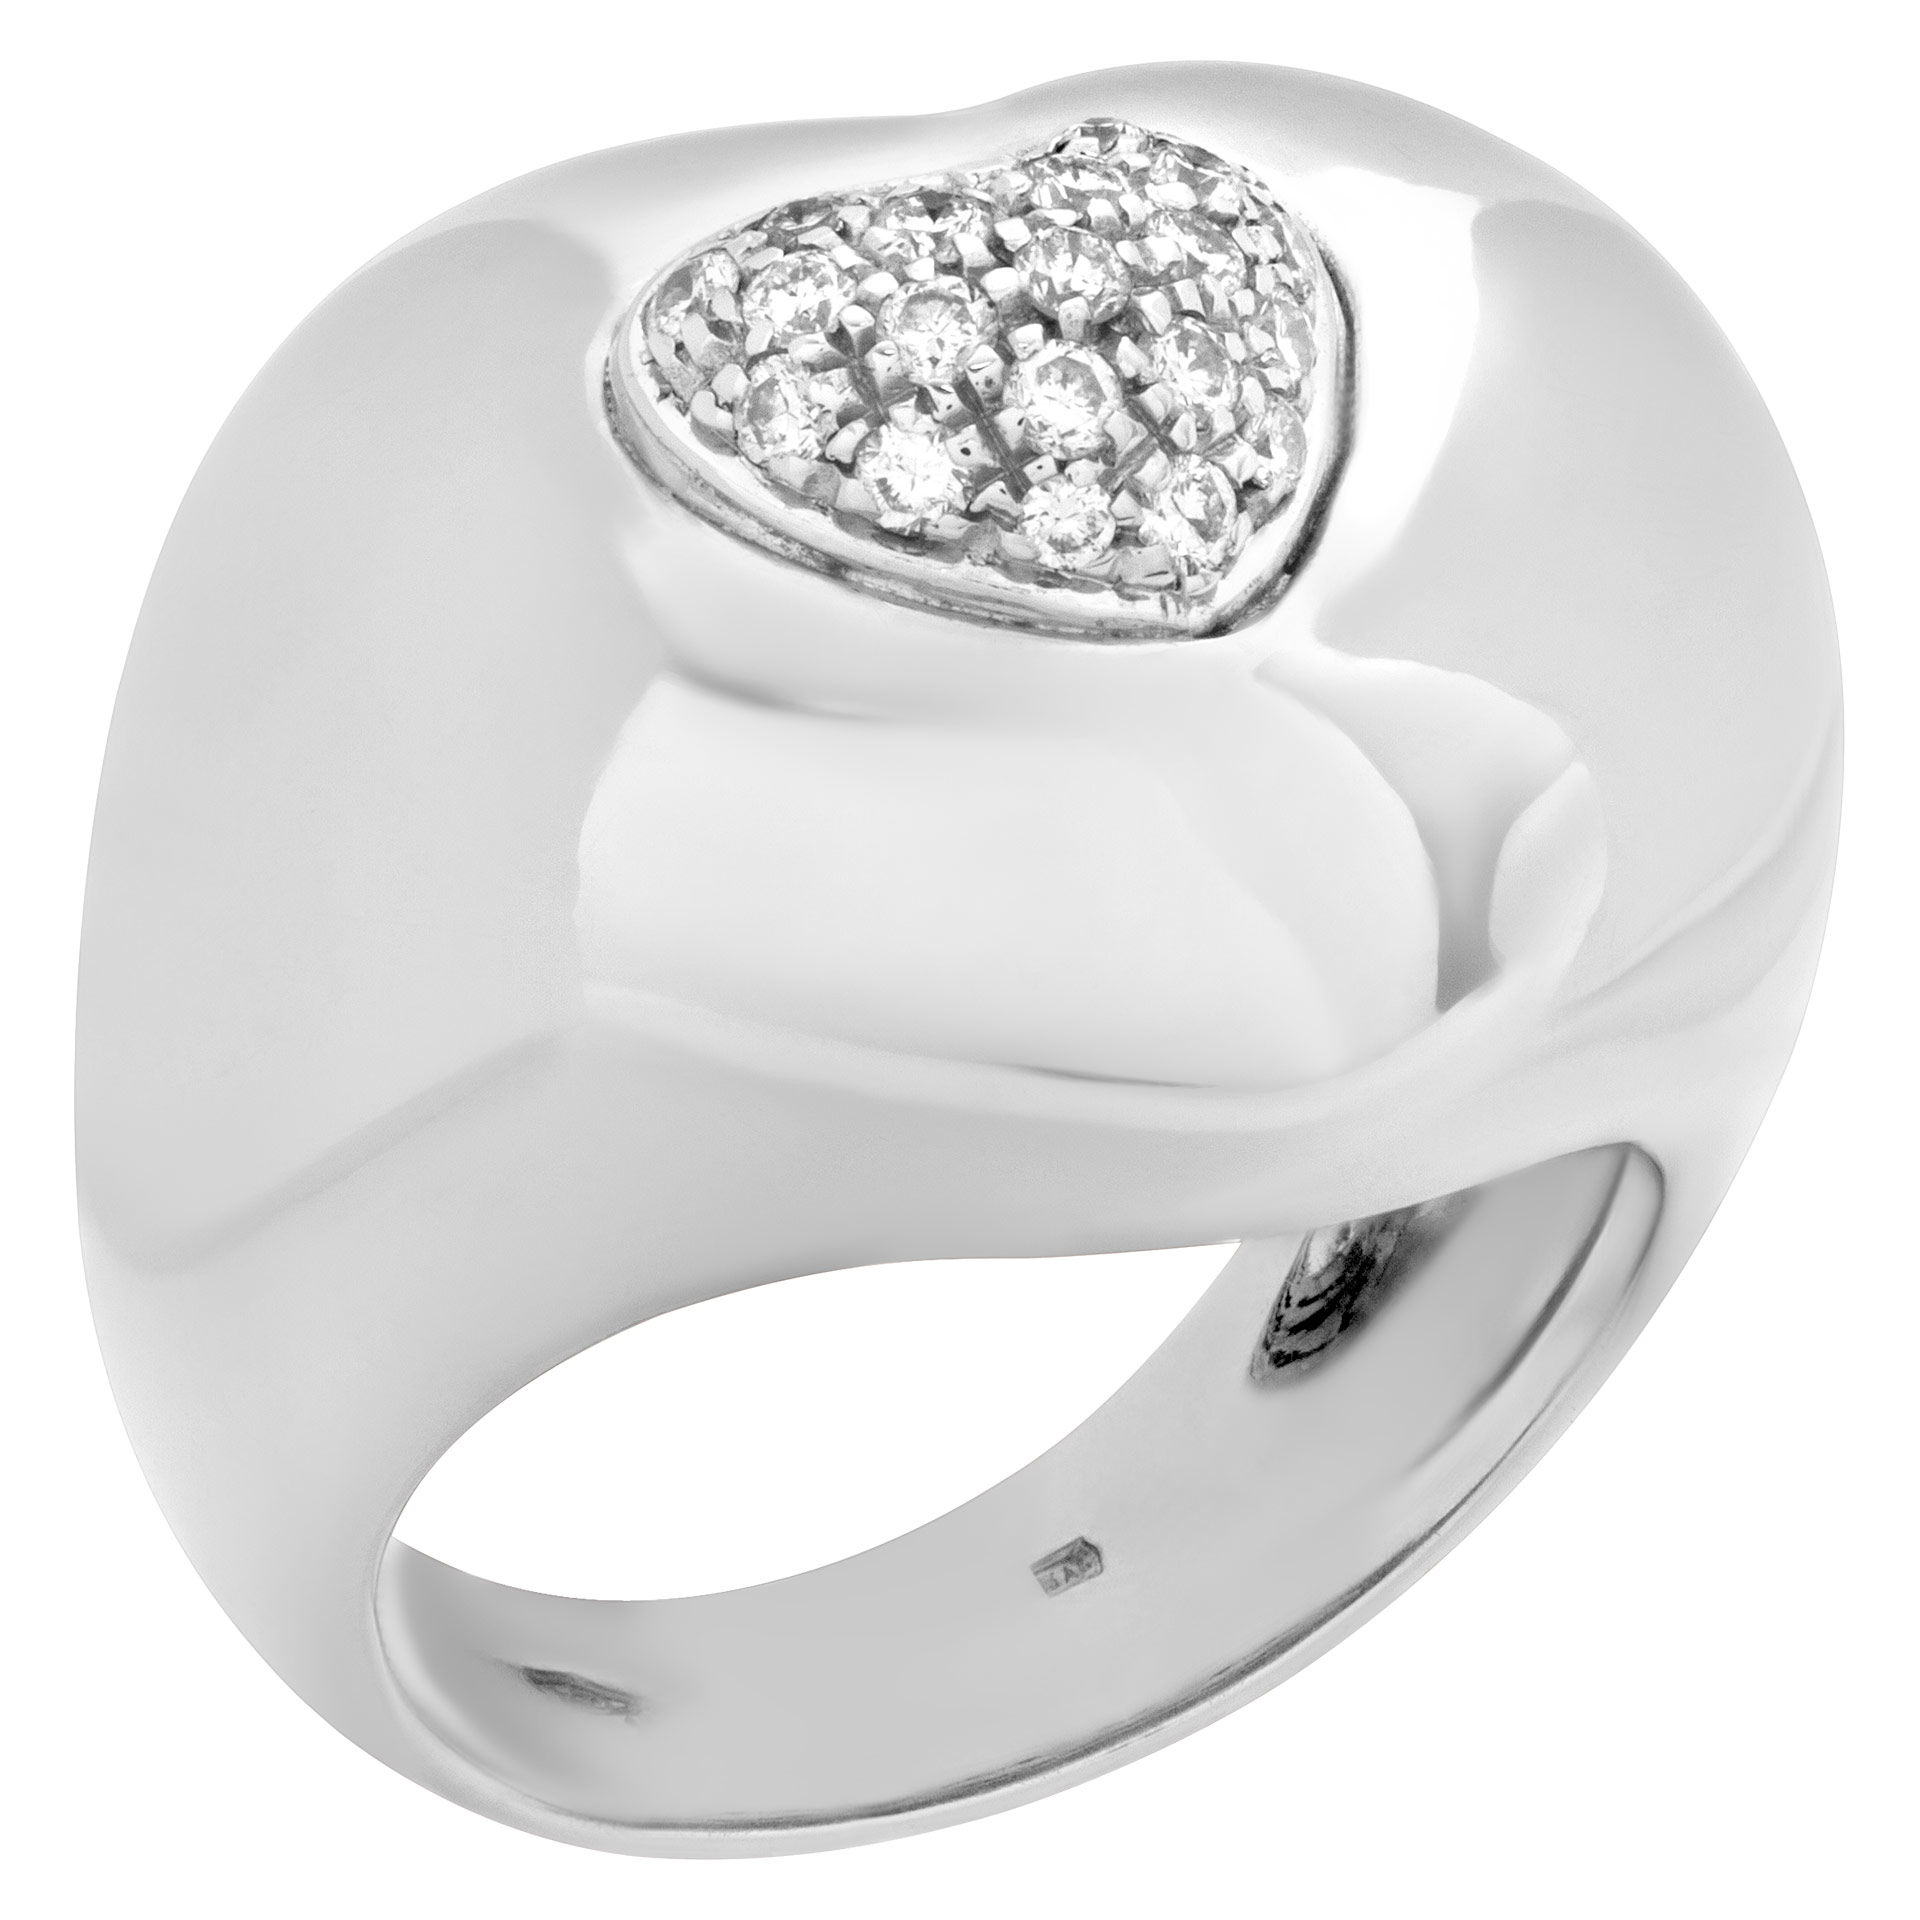 Pave diamond heart shaped ring in 18k white gold. Size 7 image 2